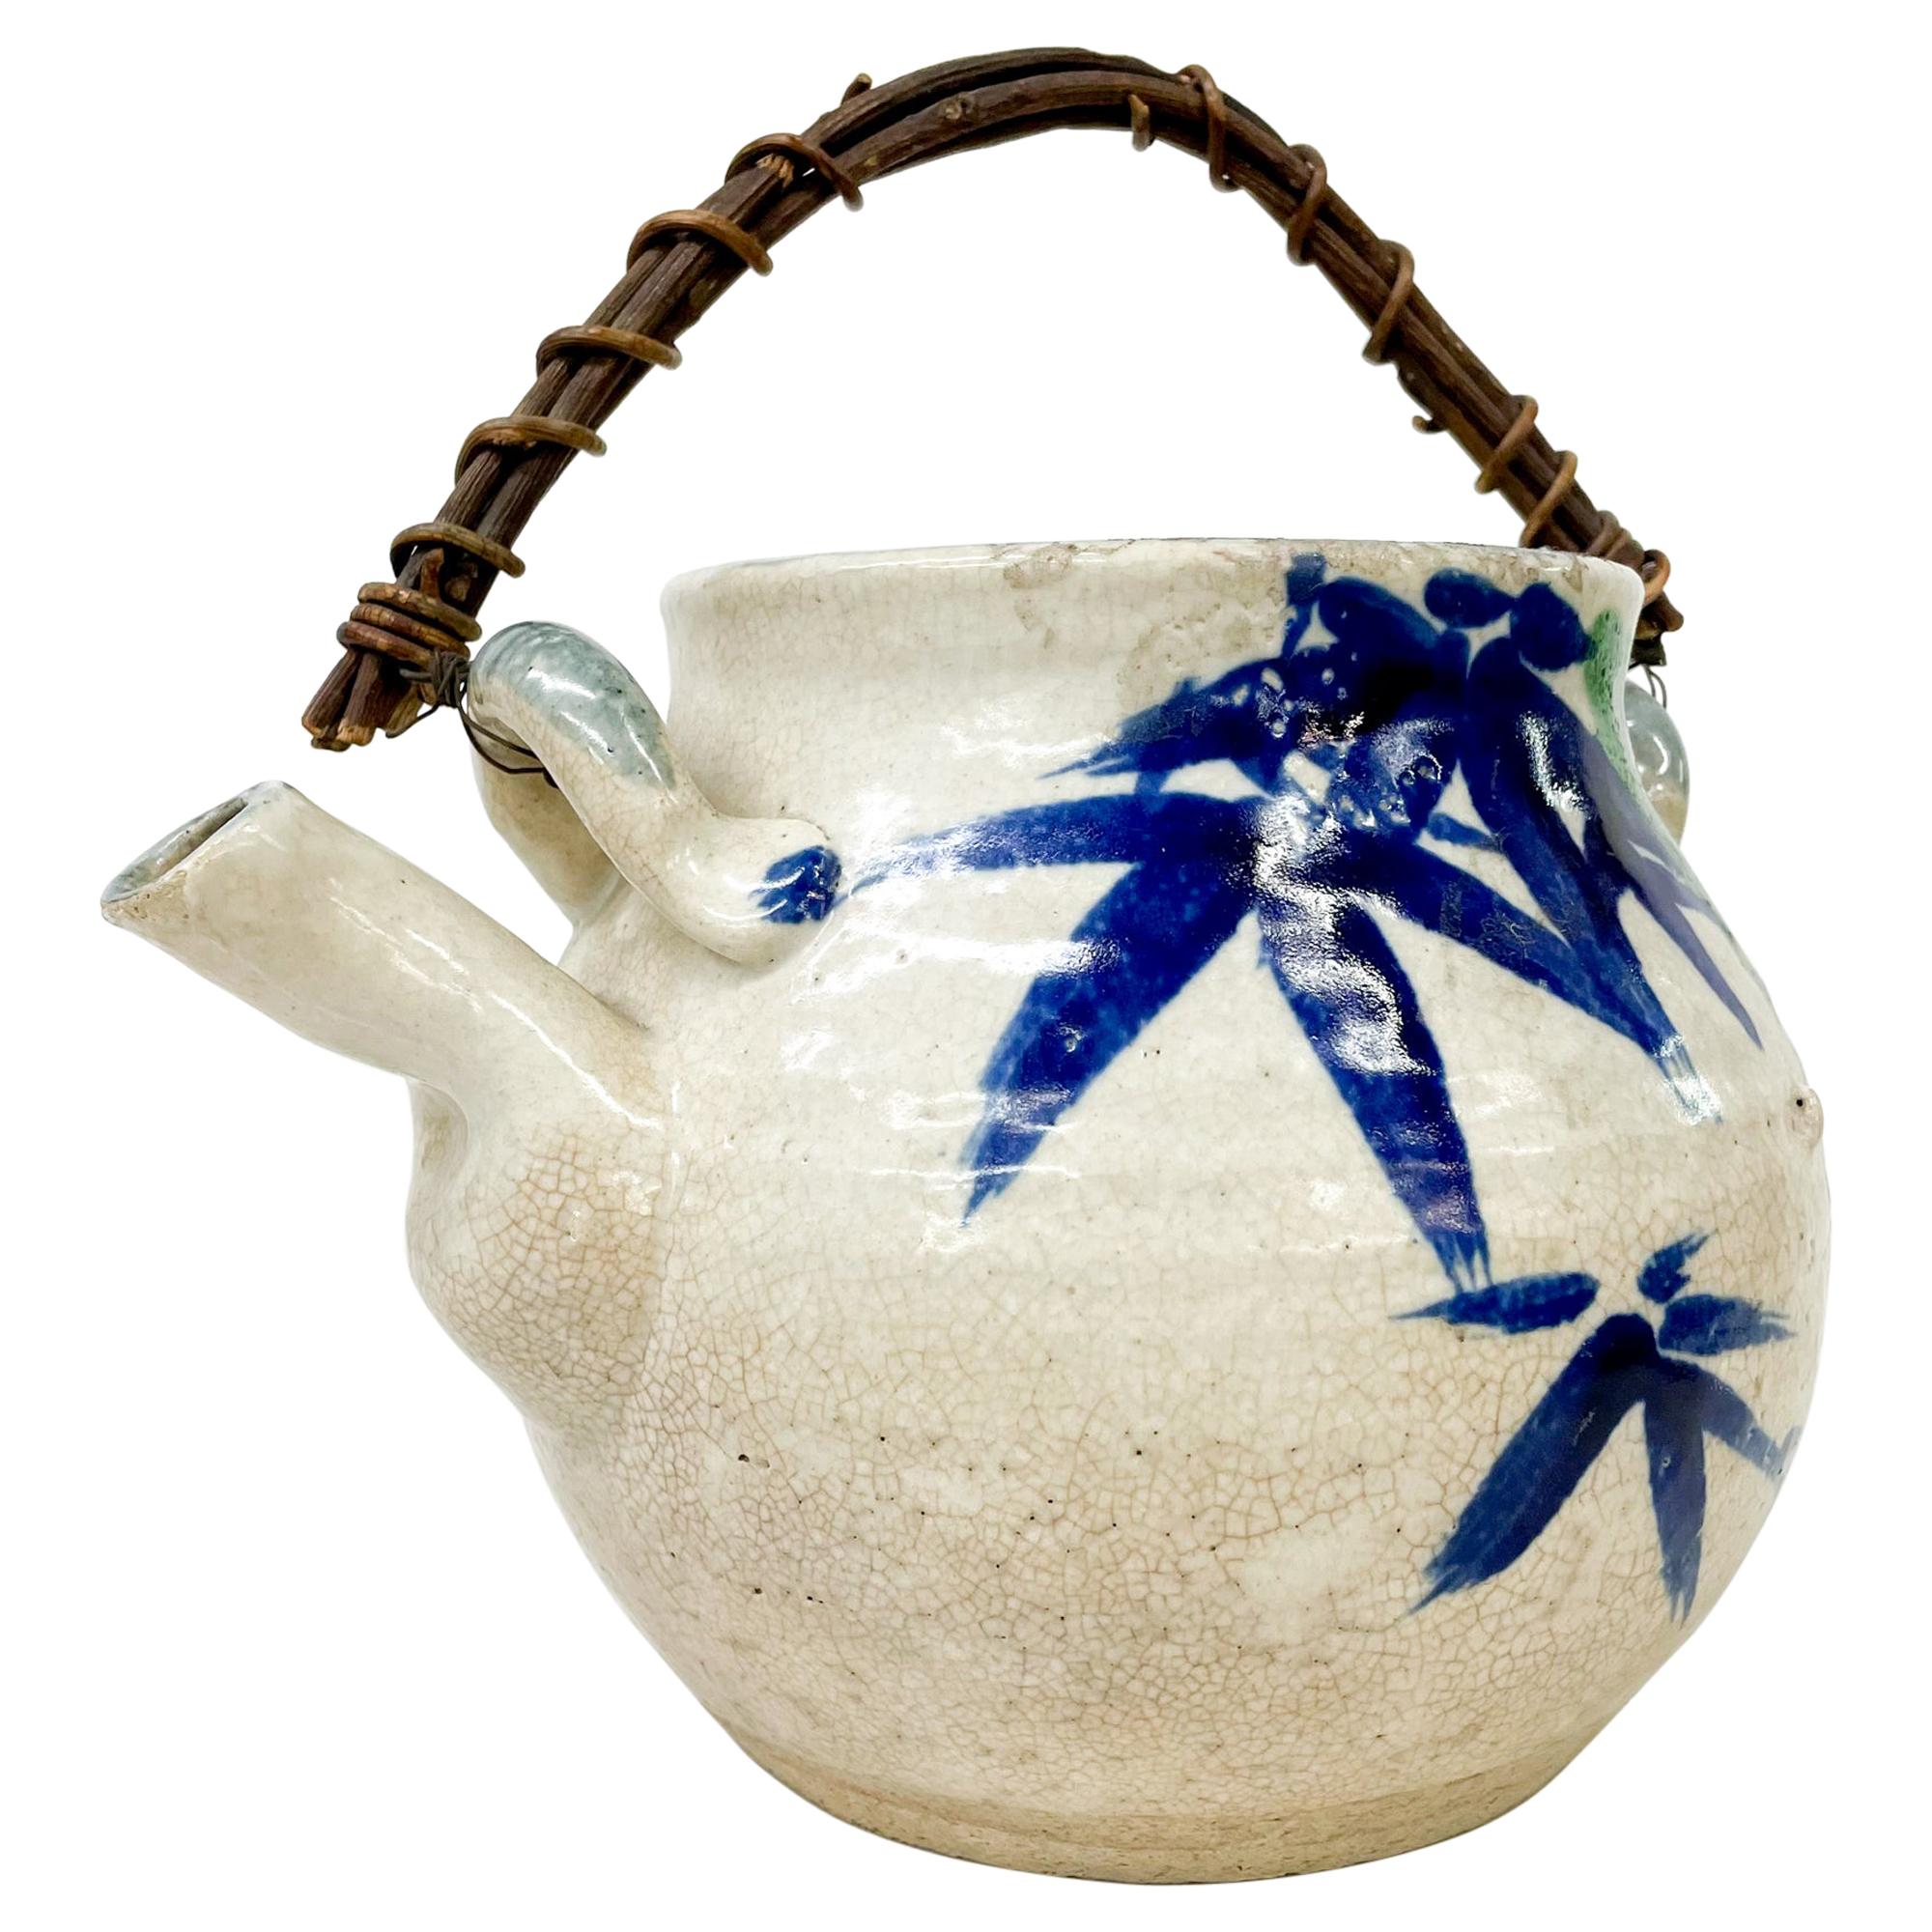 Tea Pot
Decorative Modern Japanese Pottery Tea Pot Hand Decorated Cane Handle.
Made in Japan, Circa the 1970s.
Beautiful round shape. Main color is an off-white with blue tones drawing of bamboo tree. Lovely cane handle. Matching lid.
Signed on the